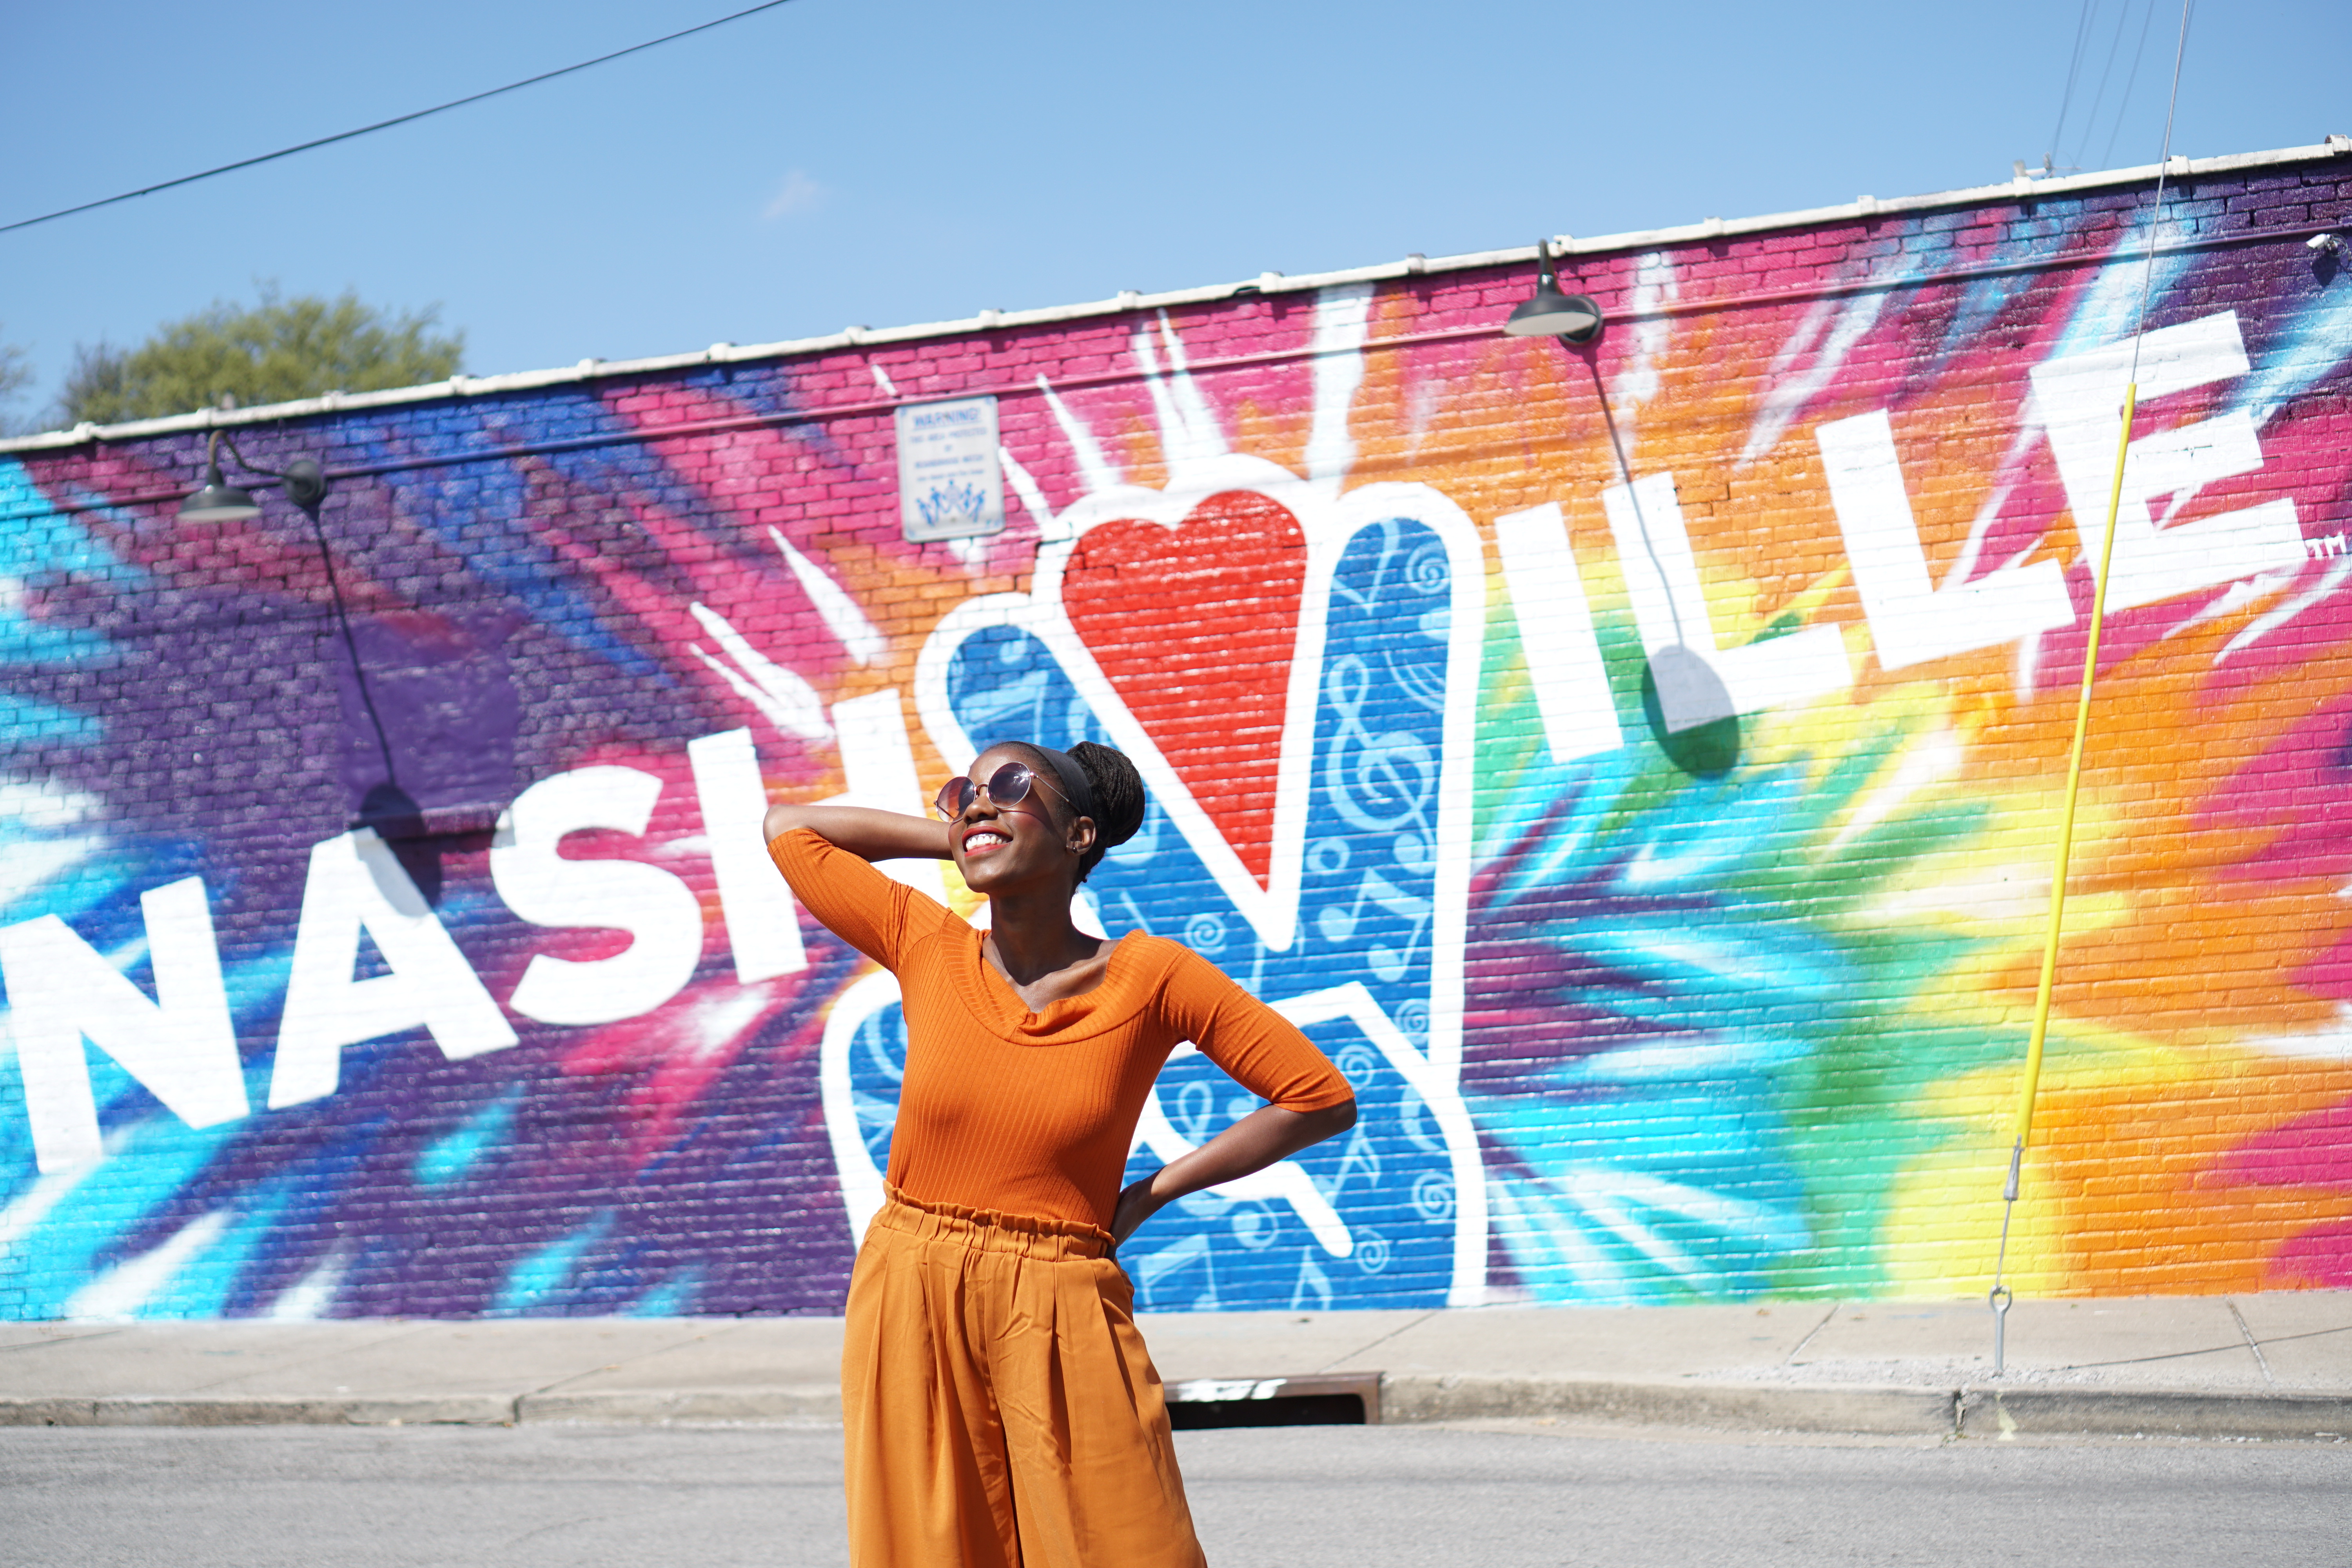 Making the most of Music City: How to spend 48 hours in Nashville |  Sightseeing + things to do guide - Oneika the Traveller